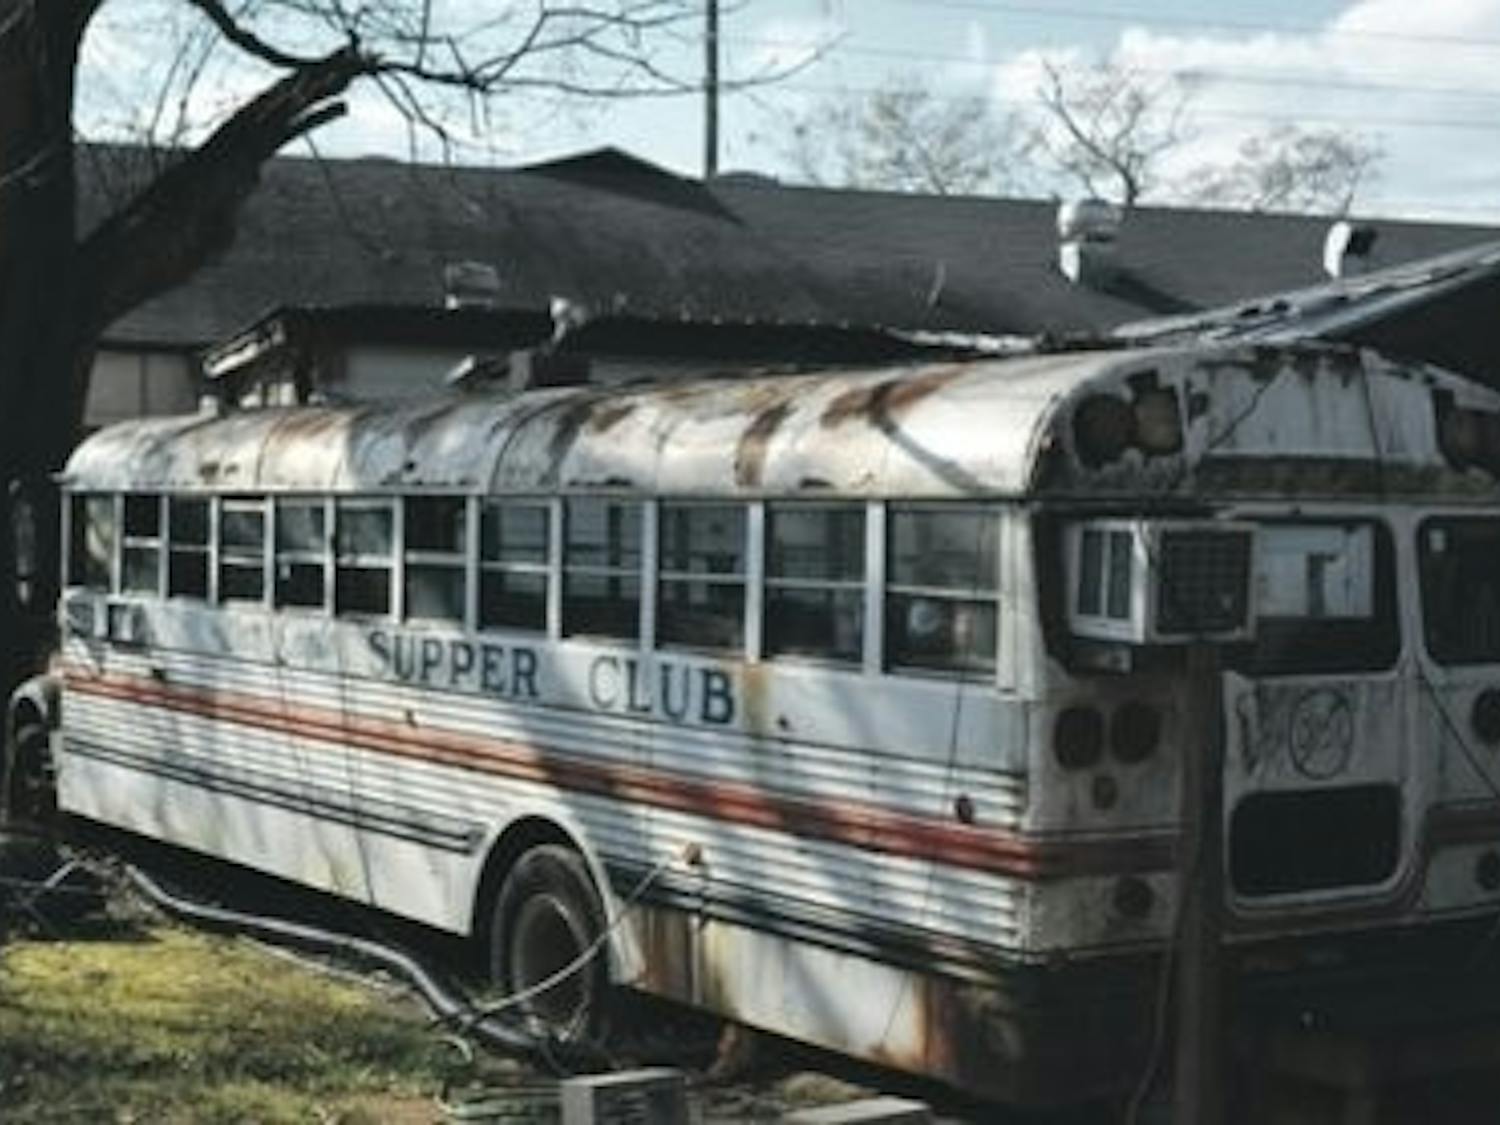 the renovated shot bus behind the Supper Club is known to get notoriously rowdy. (Raye May / PHOTO EDITOR)